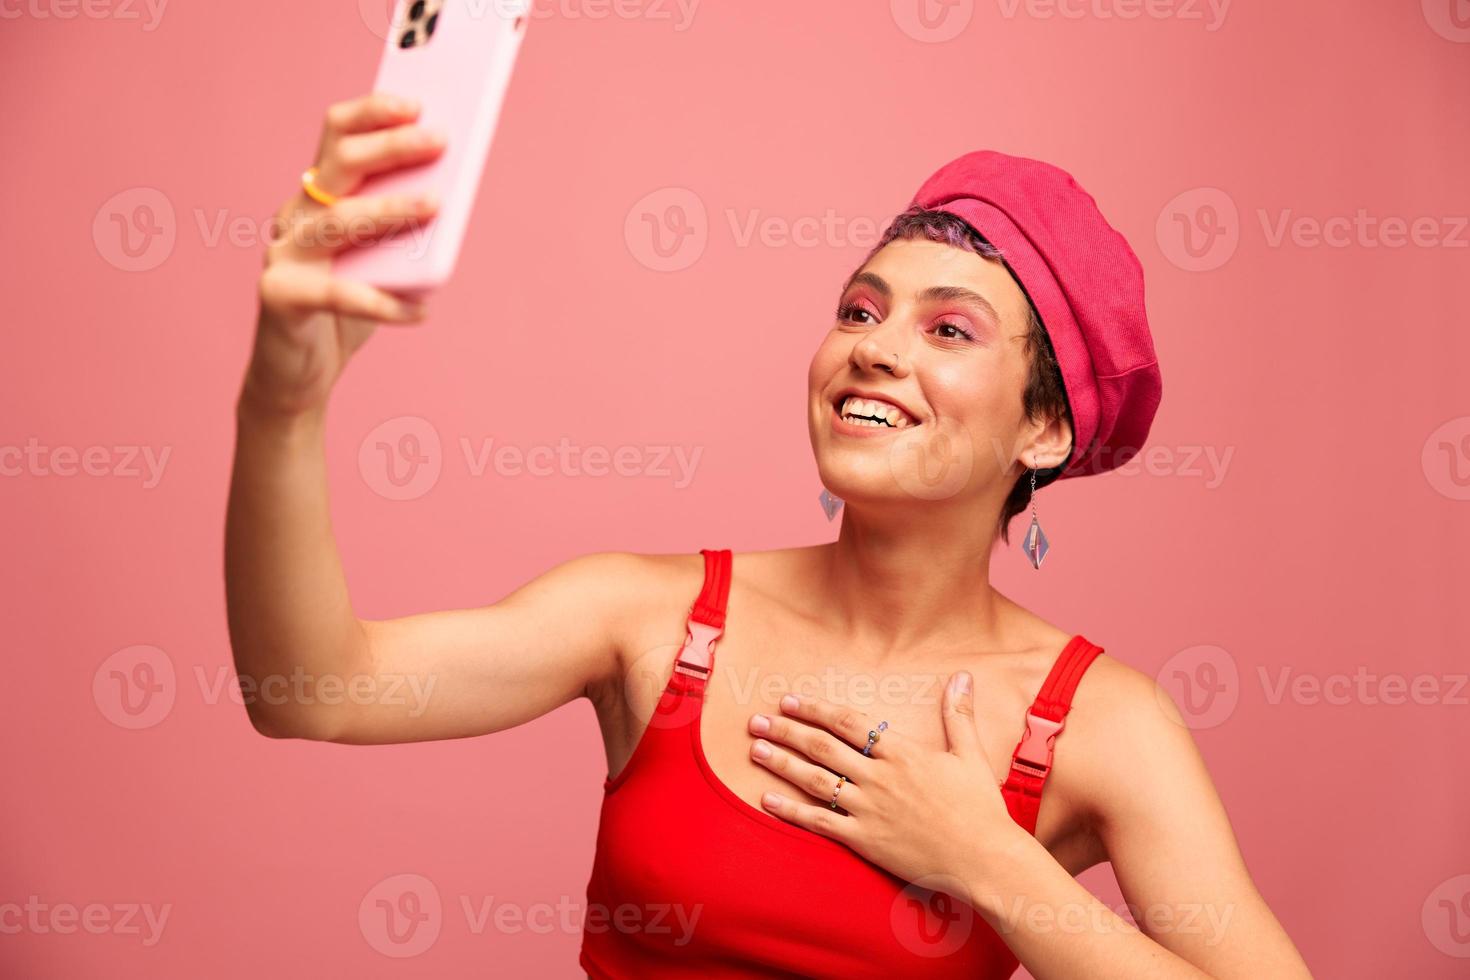 A young woman blogger with colored pink hair and a short haircut takes a picture of herself on the phone and broadcasts a smile in stylish clothes and a hat on a pink background monochrome style photo